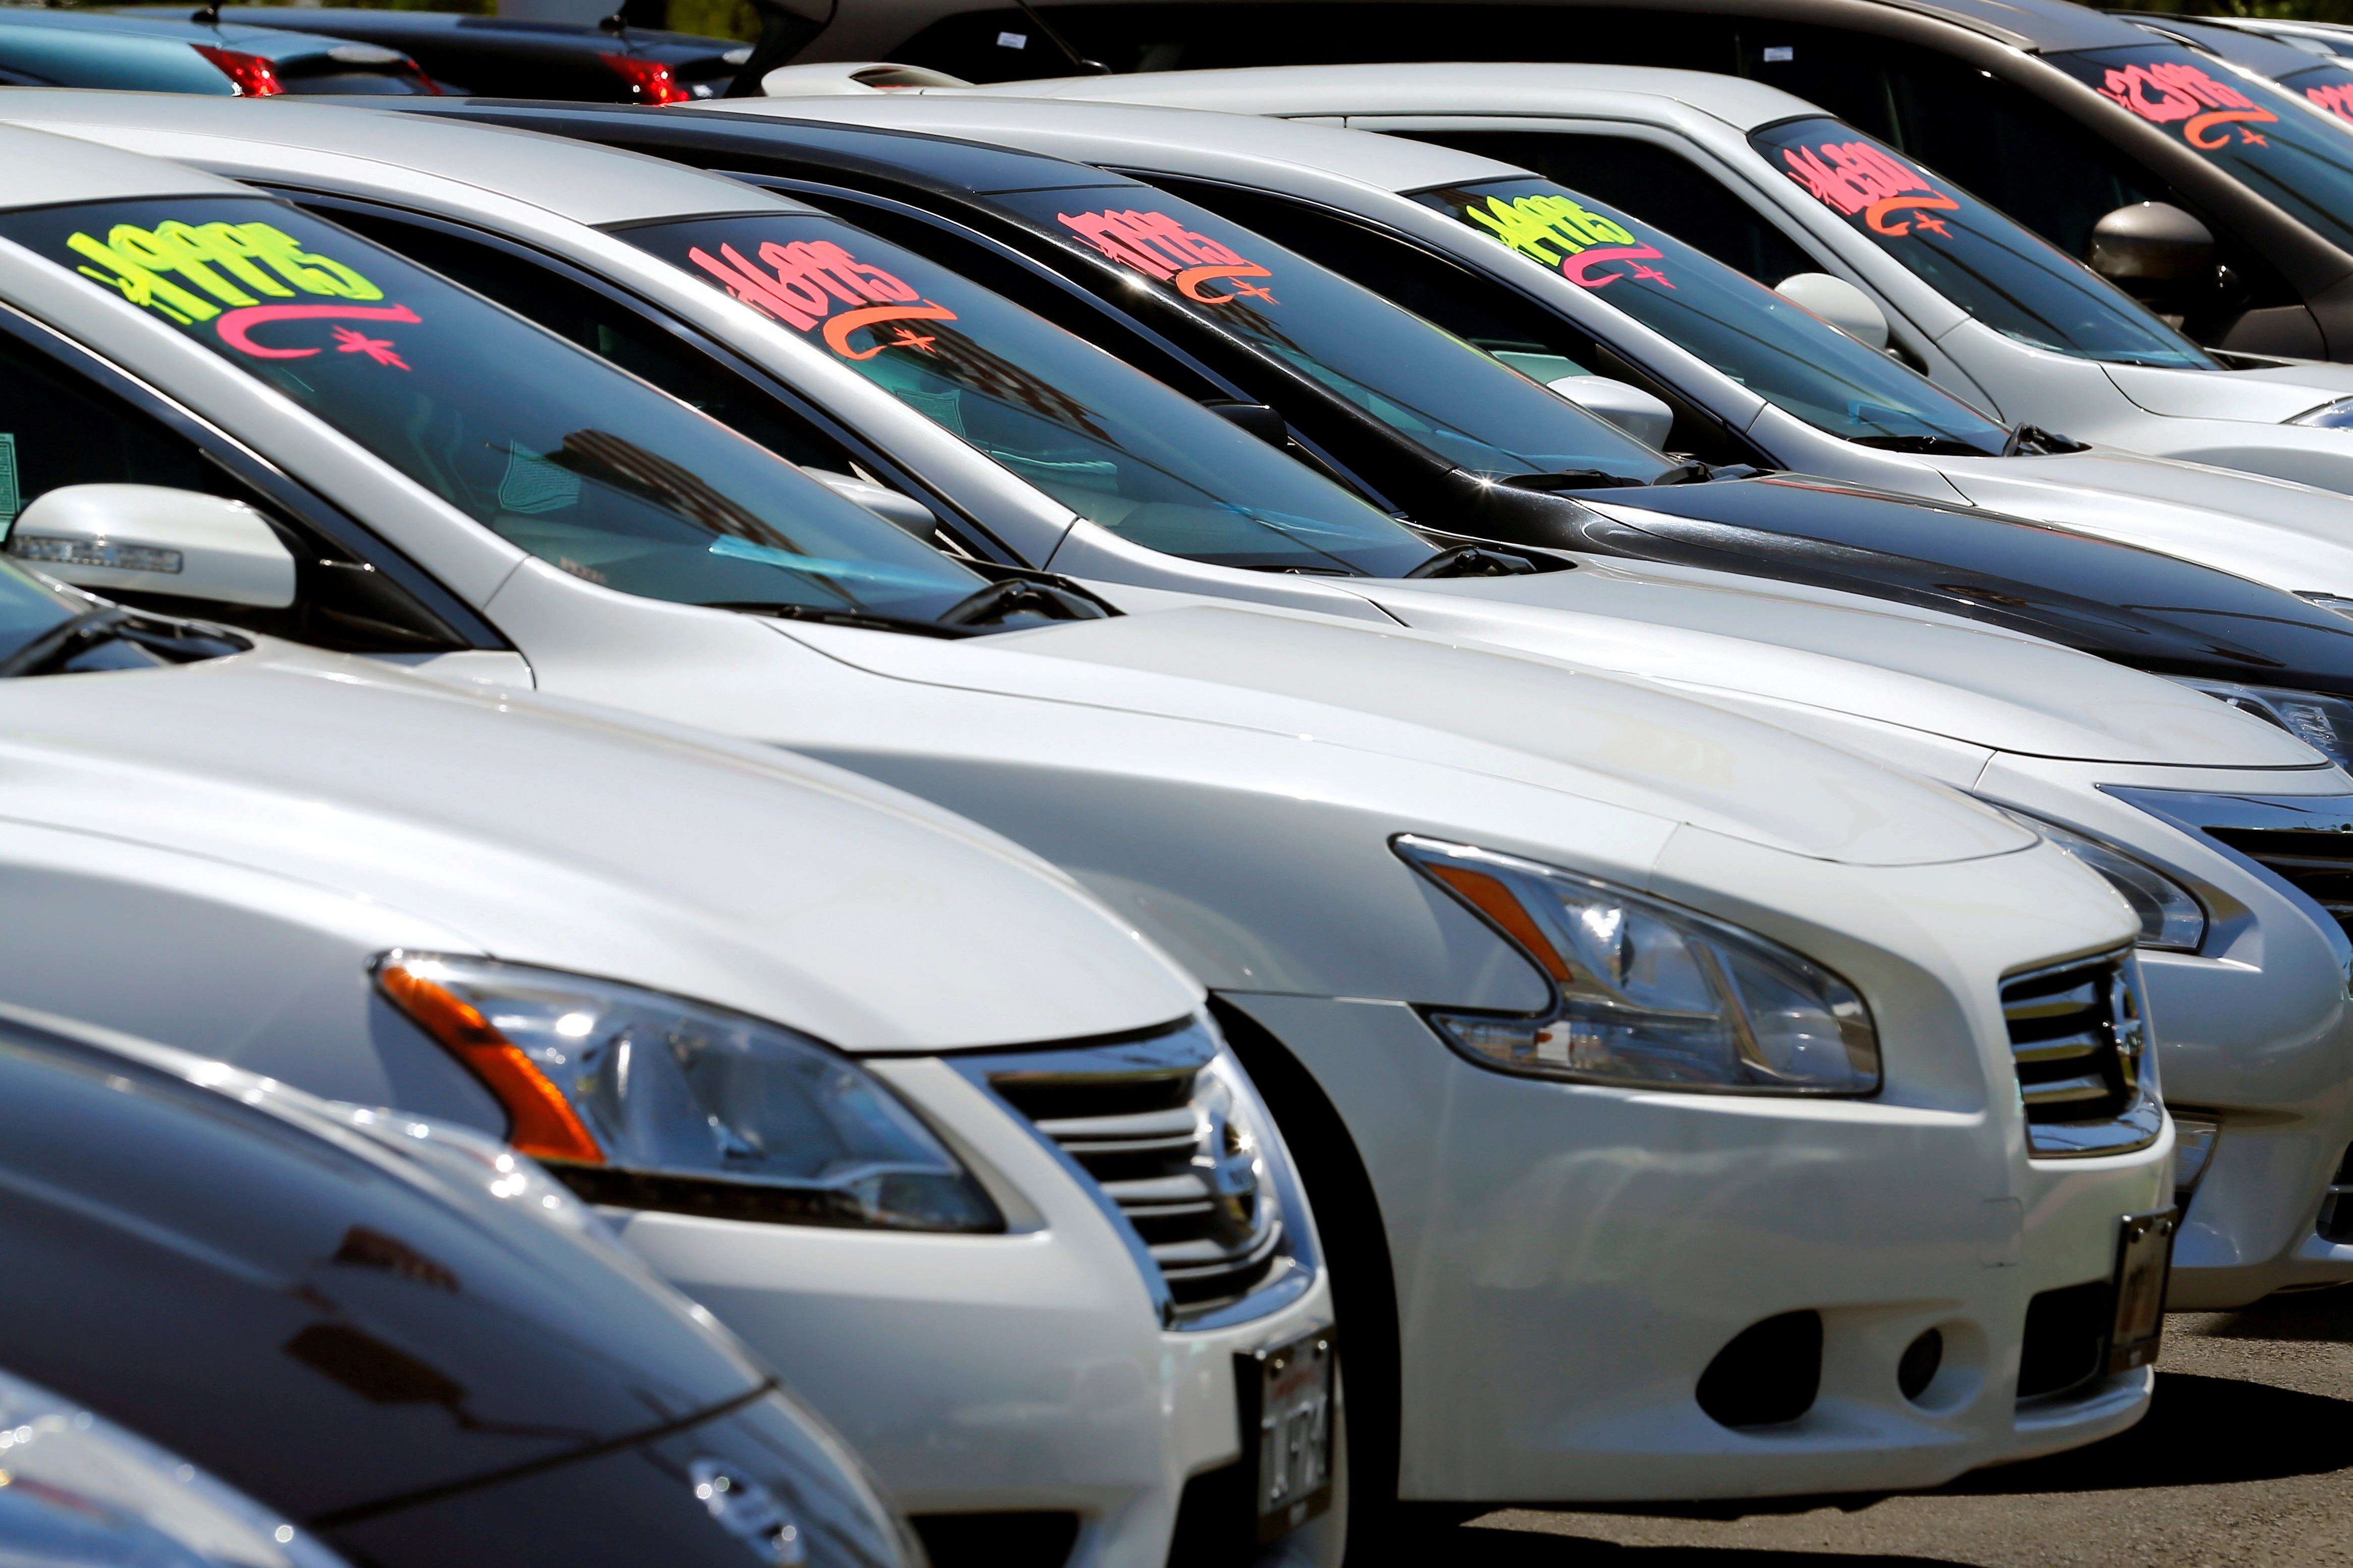 Automobiles are shown for sale at a car dealership in Carlsbad, California.